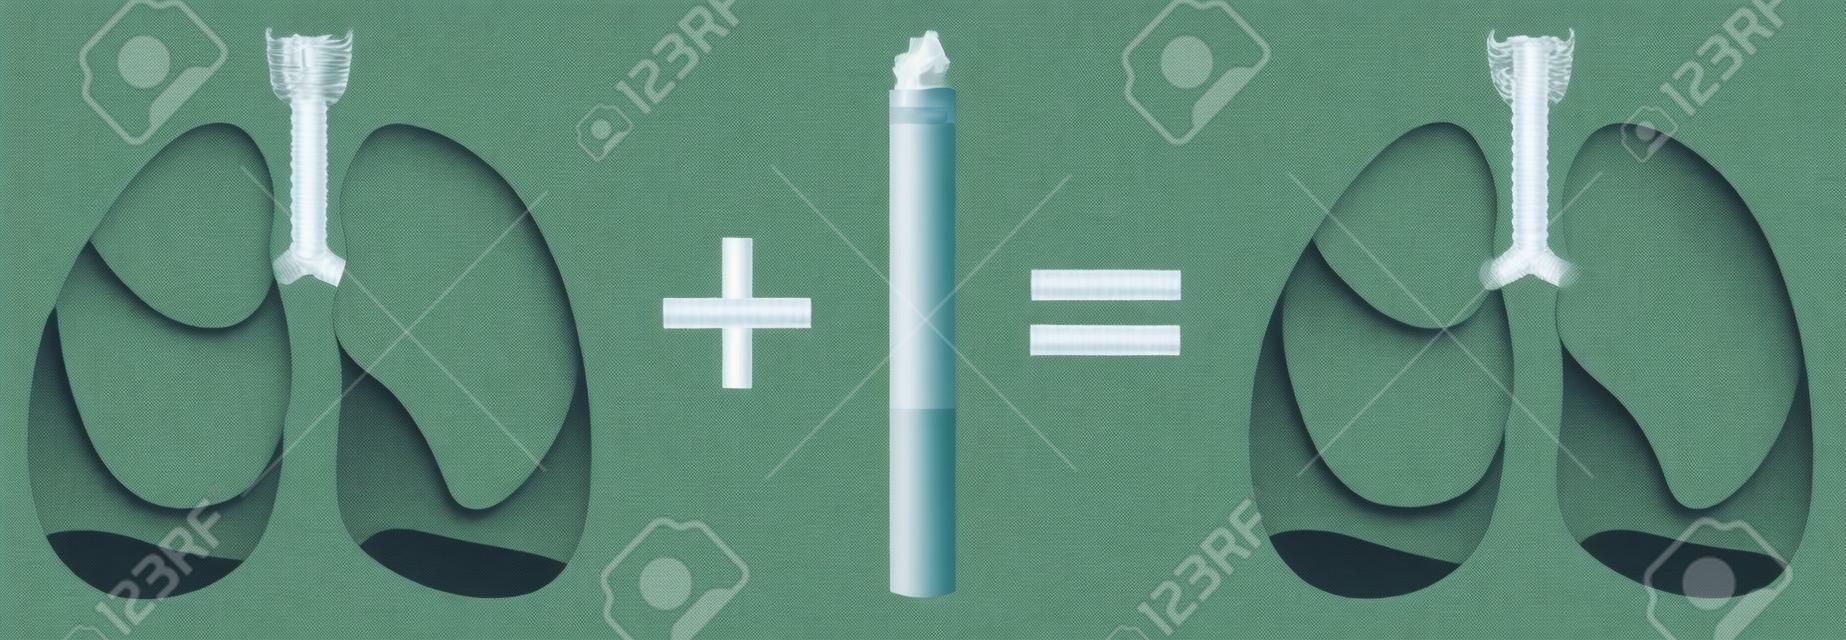 Healthy lungs plus cigarette result of lung cancer. Harm of smoking. Illustration in vector format